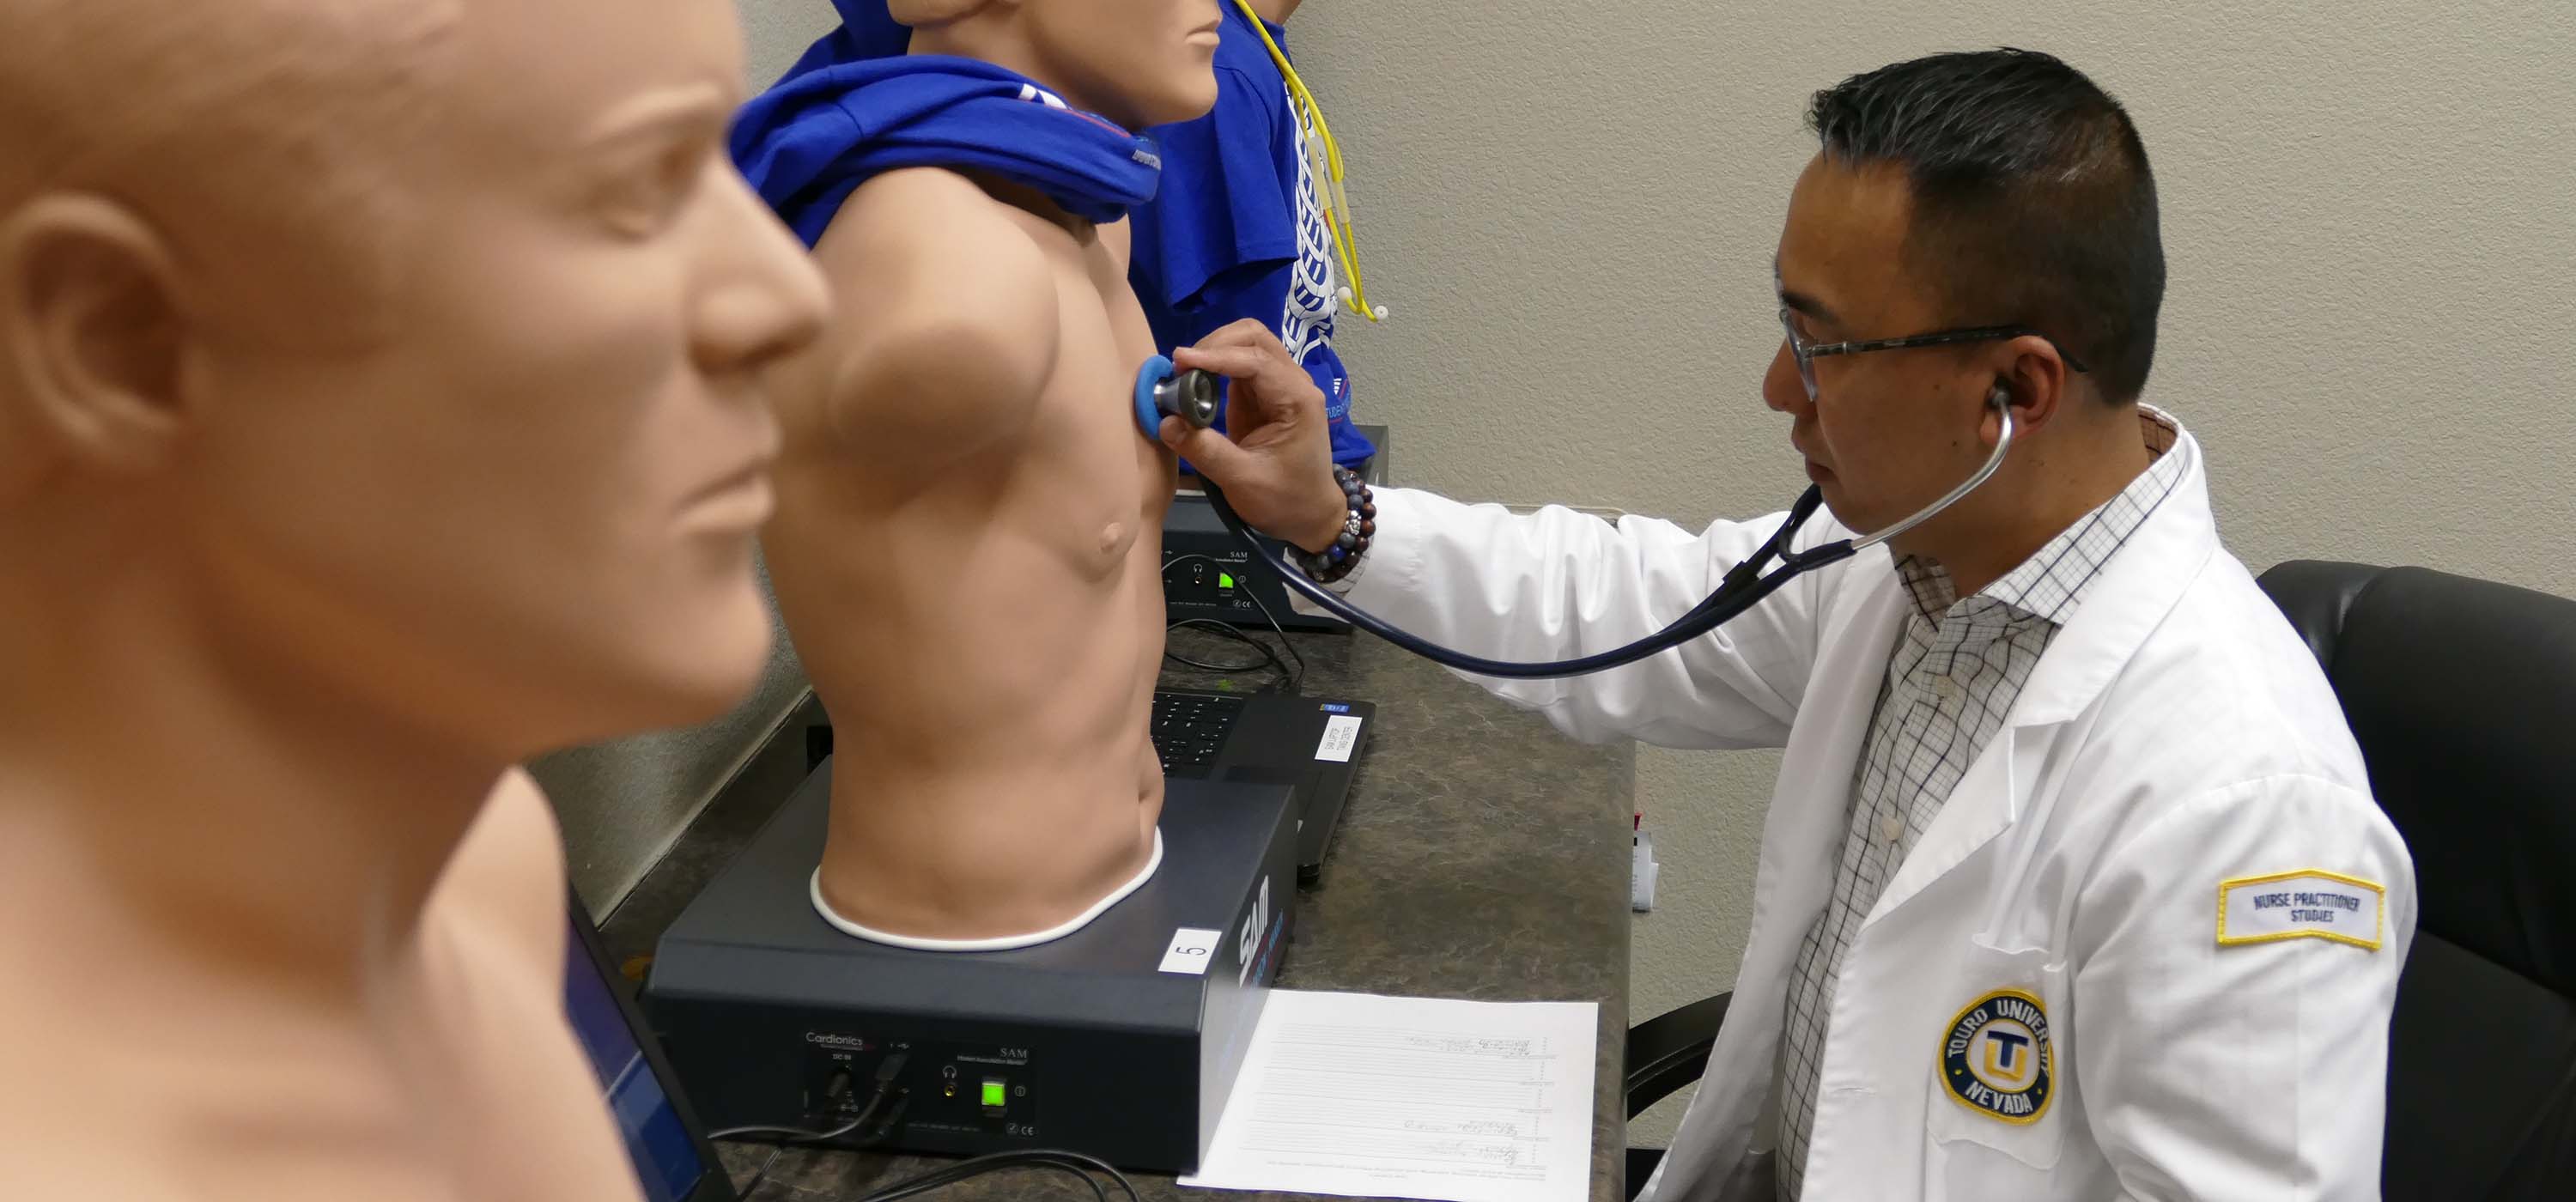 A student practices on a manikin.